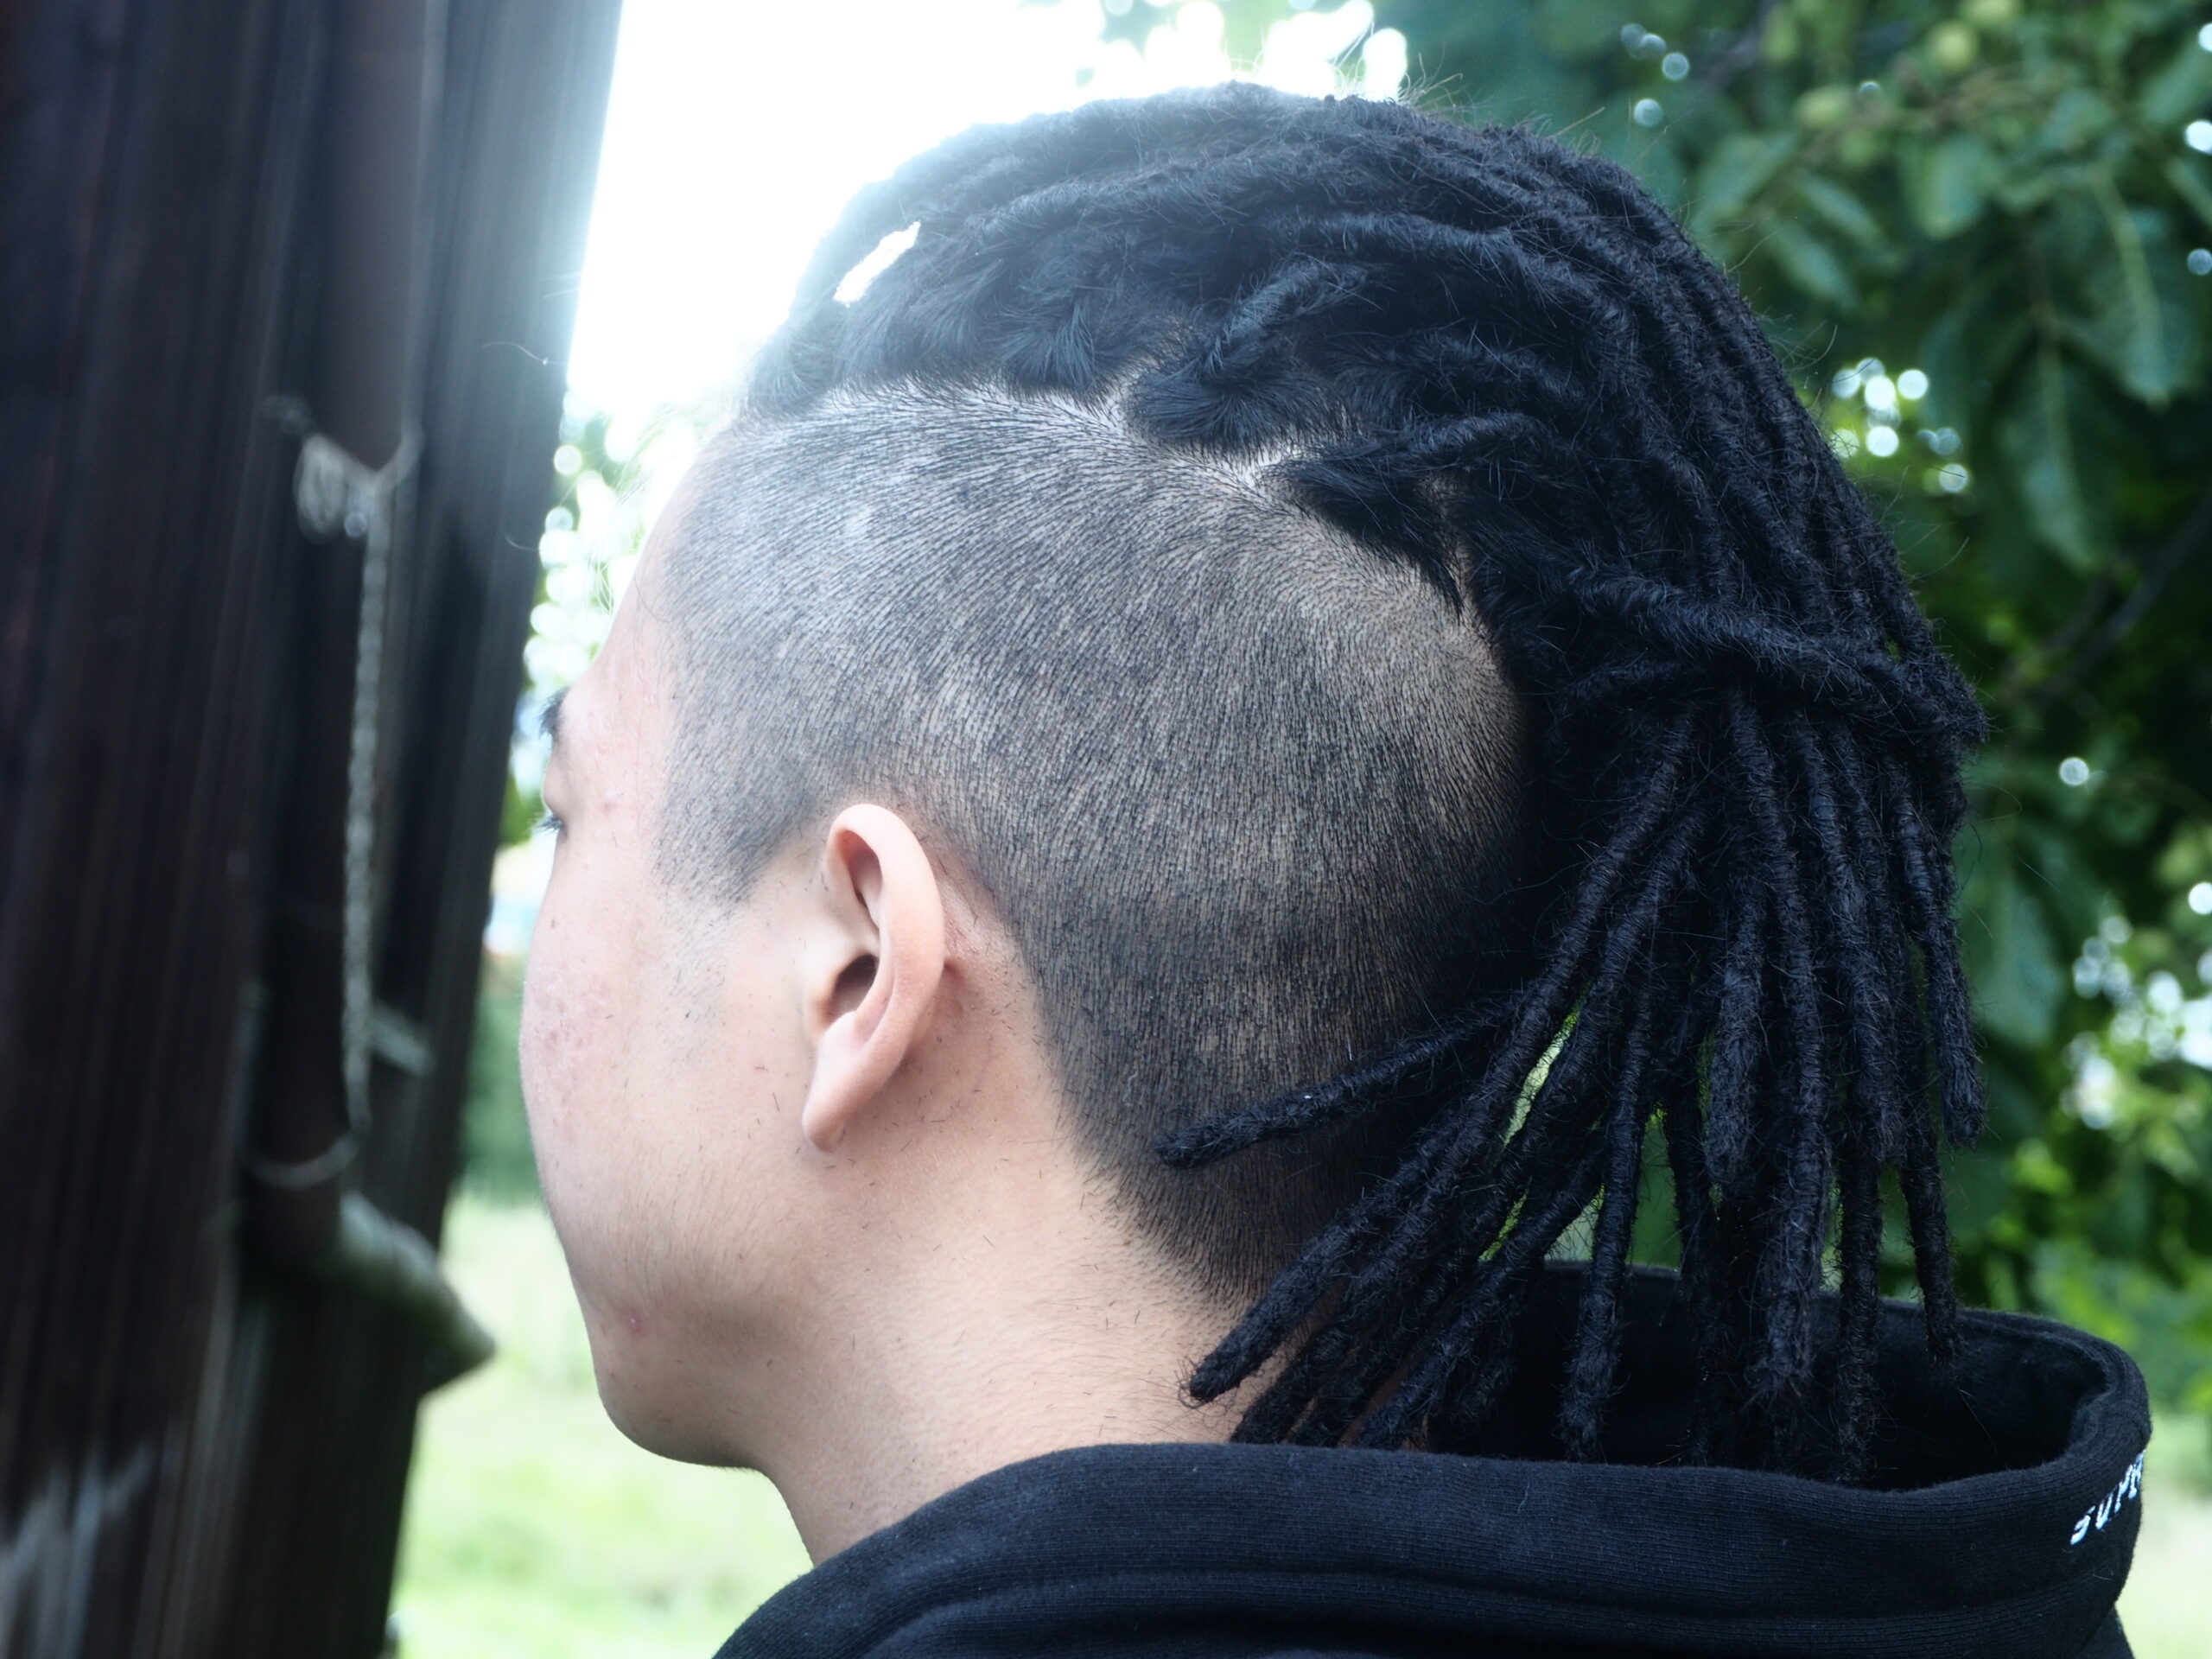 Chinese man with Dreads